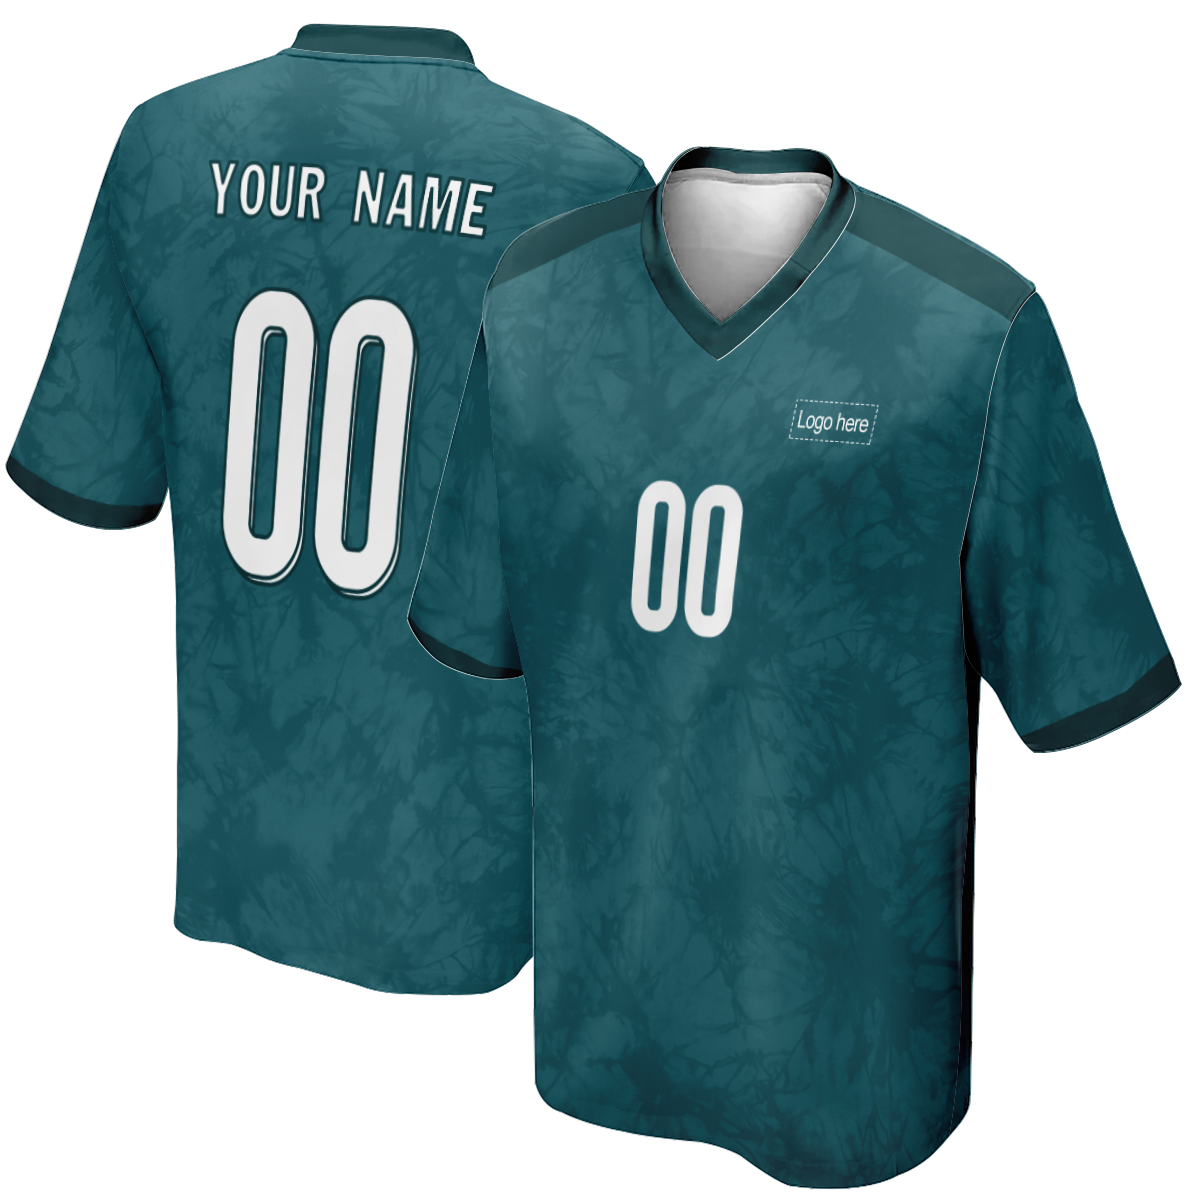 Men's Limited Saudi Arabia World Cup Soccer Jerseys With Name